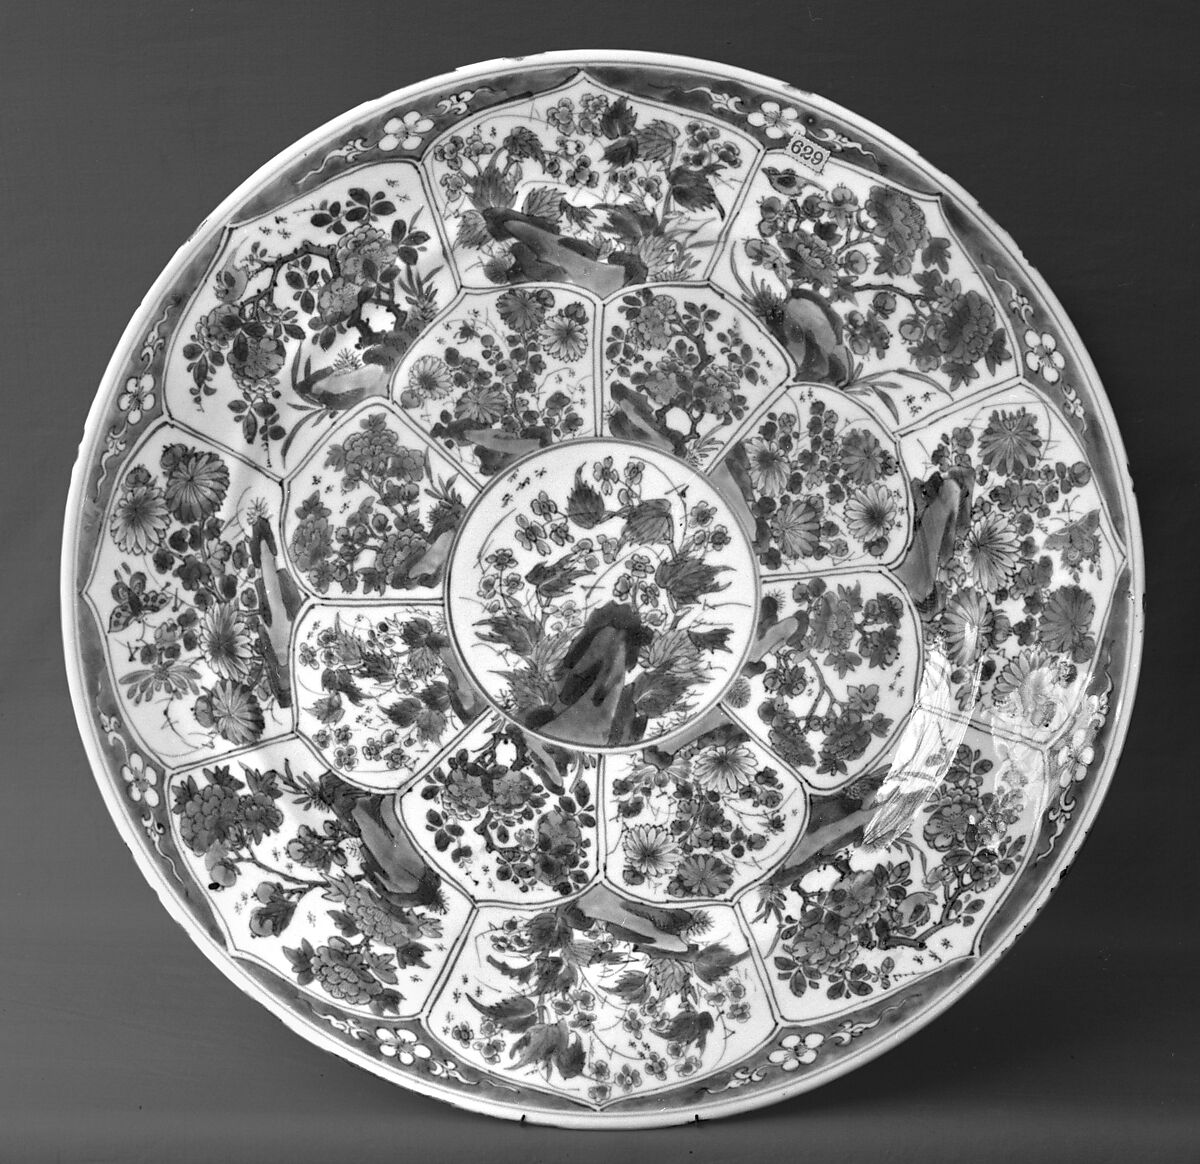 Plate with flowers, Porcelain painted in underglaze cobalt blue (Jingdezhen ware), China 